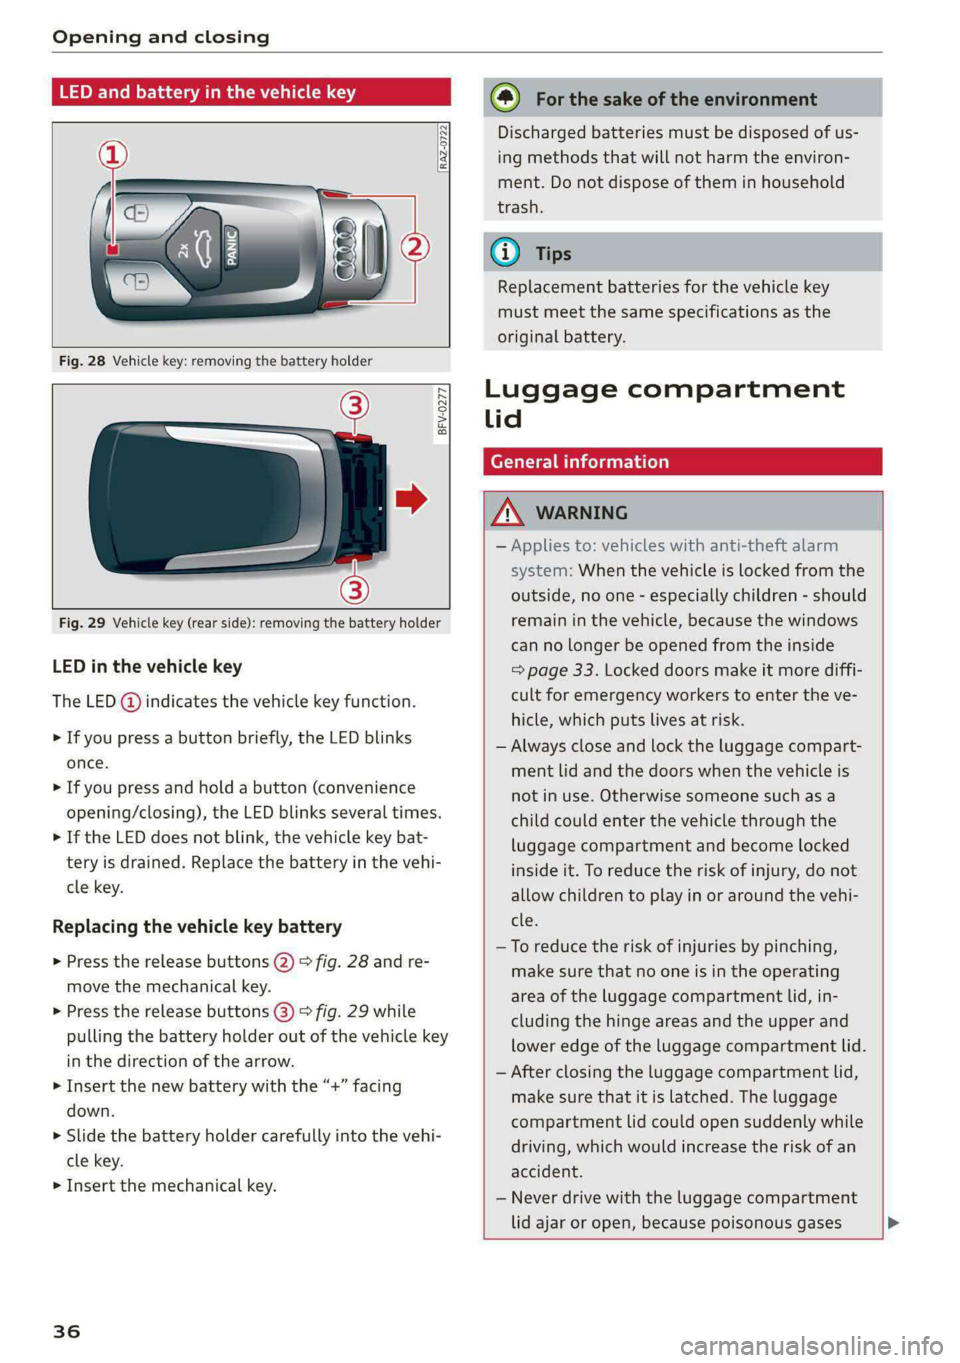 AUDI S4 2020  Owners Manual Opening and closing 
  
  
RAZ-0722 
  
  
  
BFV-0277 
  
      
Fig. 29 Vehicle key (rear side): removing the battery holder 
LED in the vehicle key 
The LED @) indicates the vehicle key function. 
